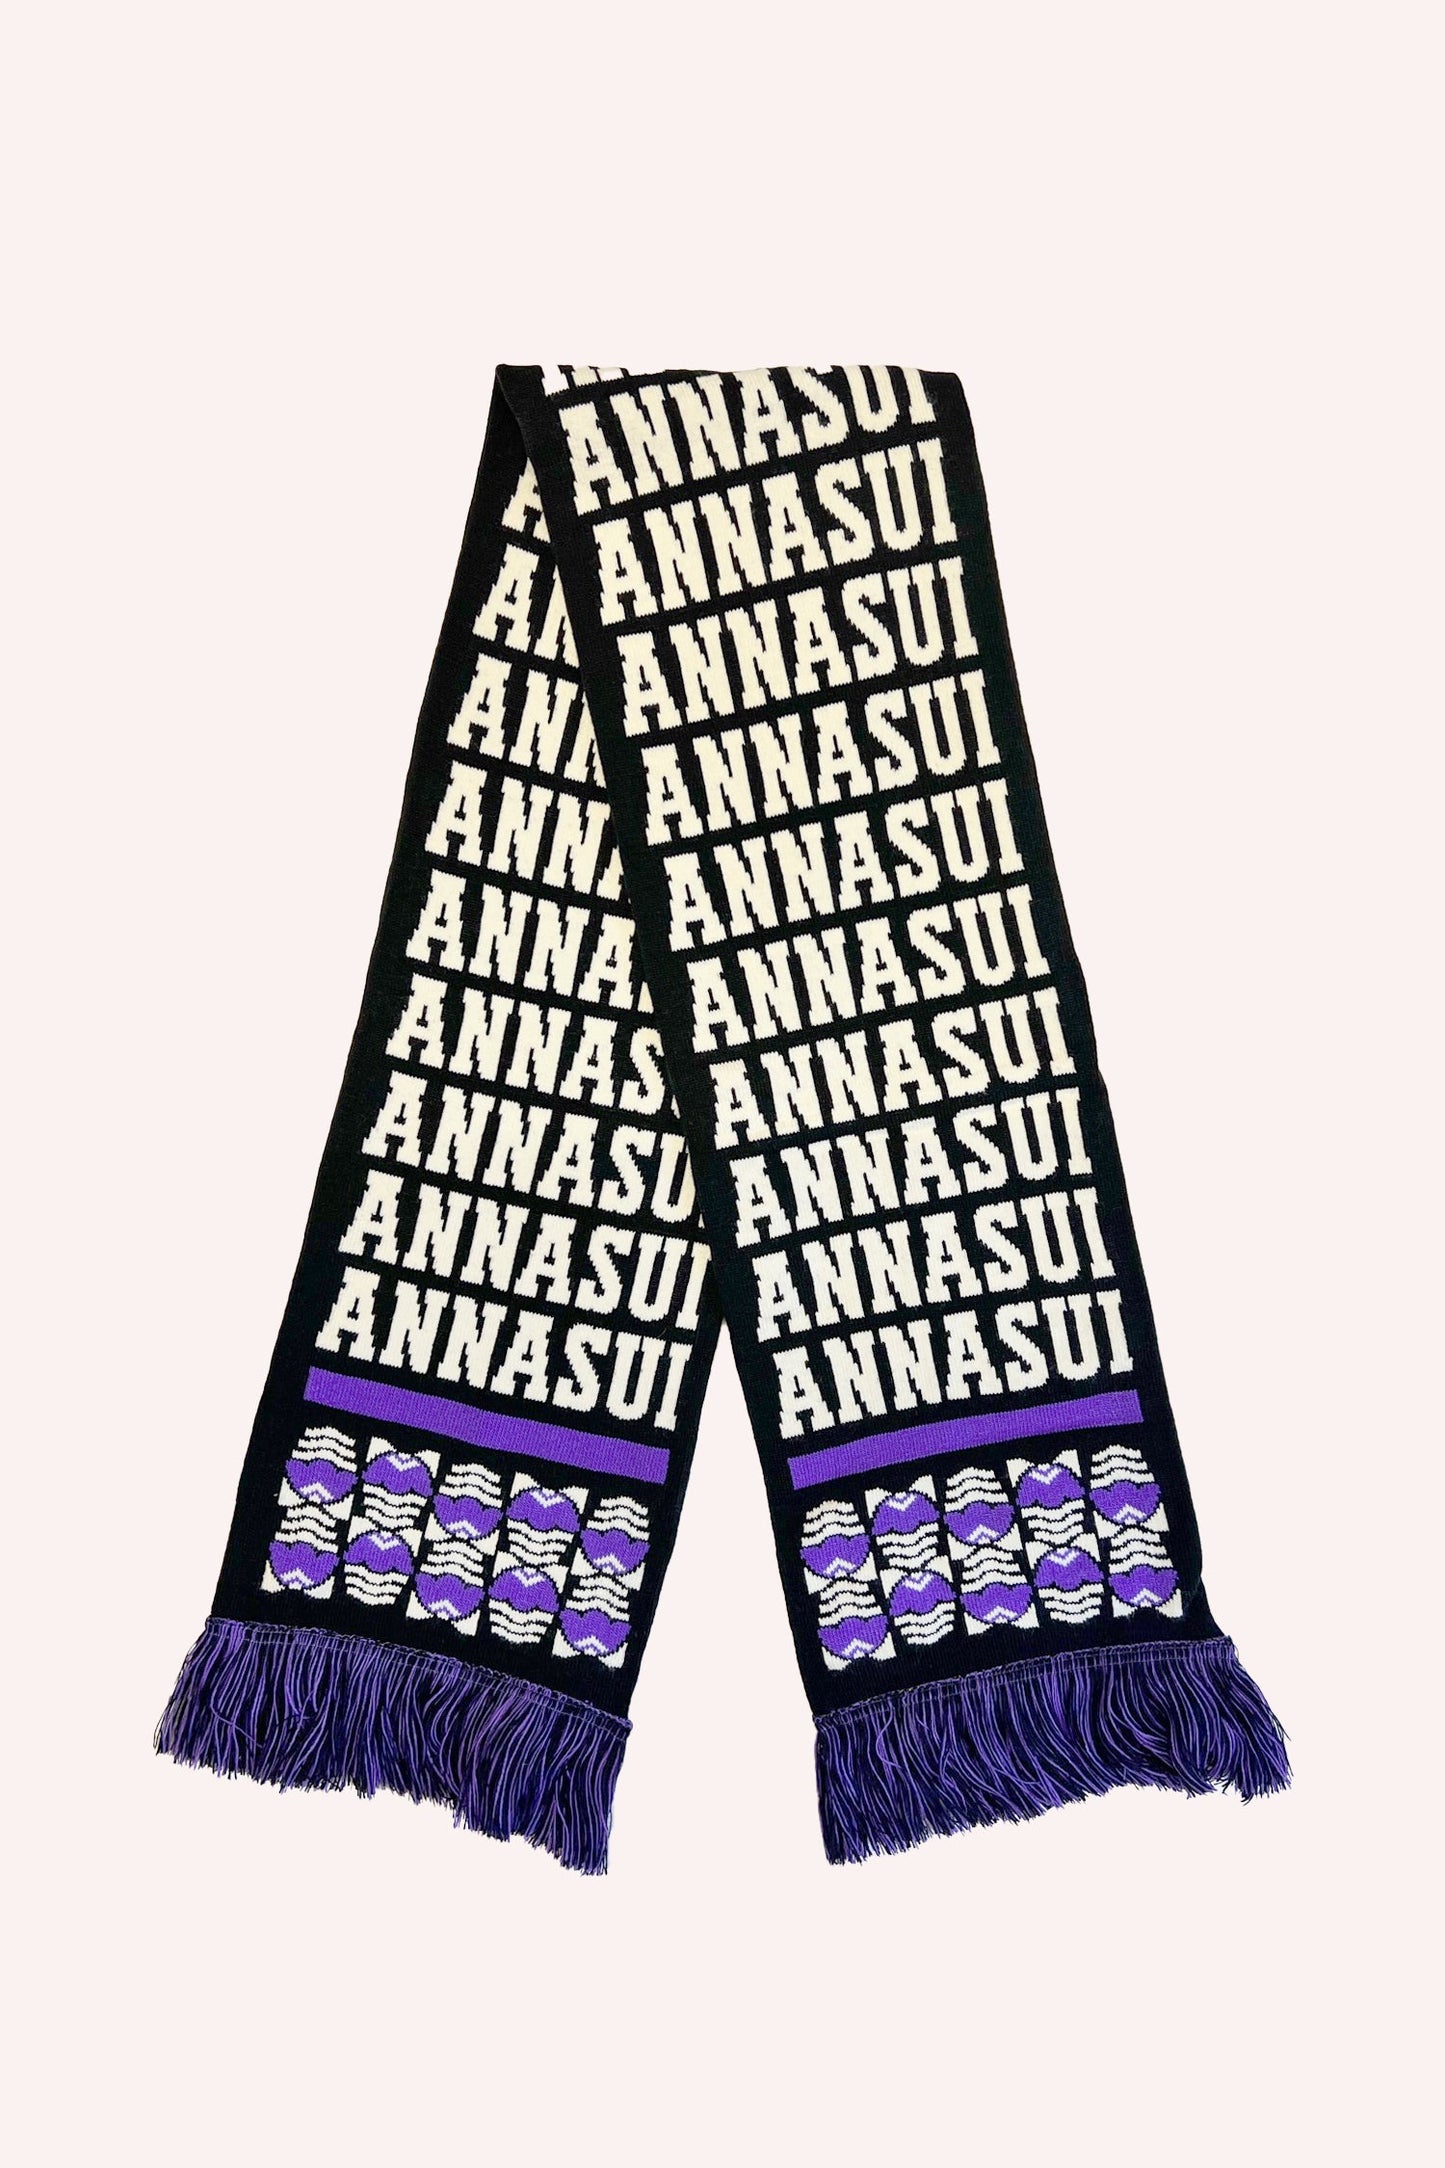 Black Scarf with pattern Anna Sui, purple fringes beneath a stylized eggs, purple line on both ends